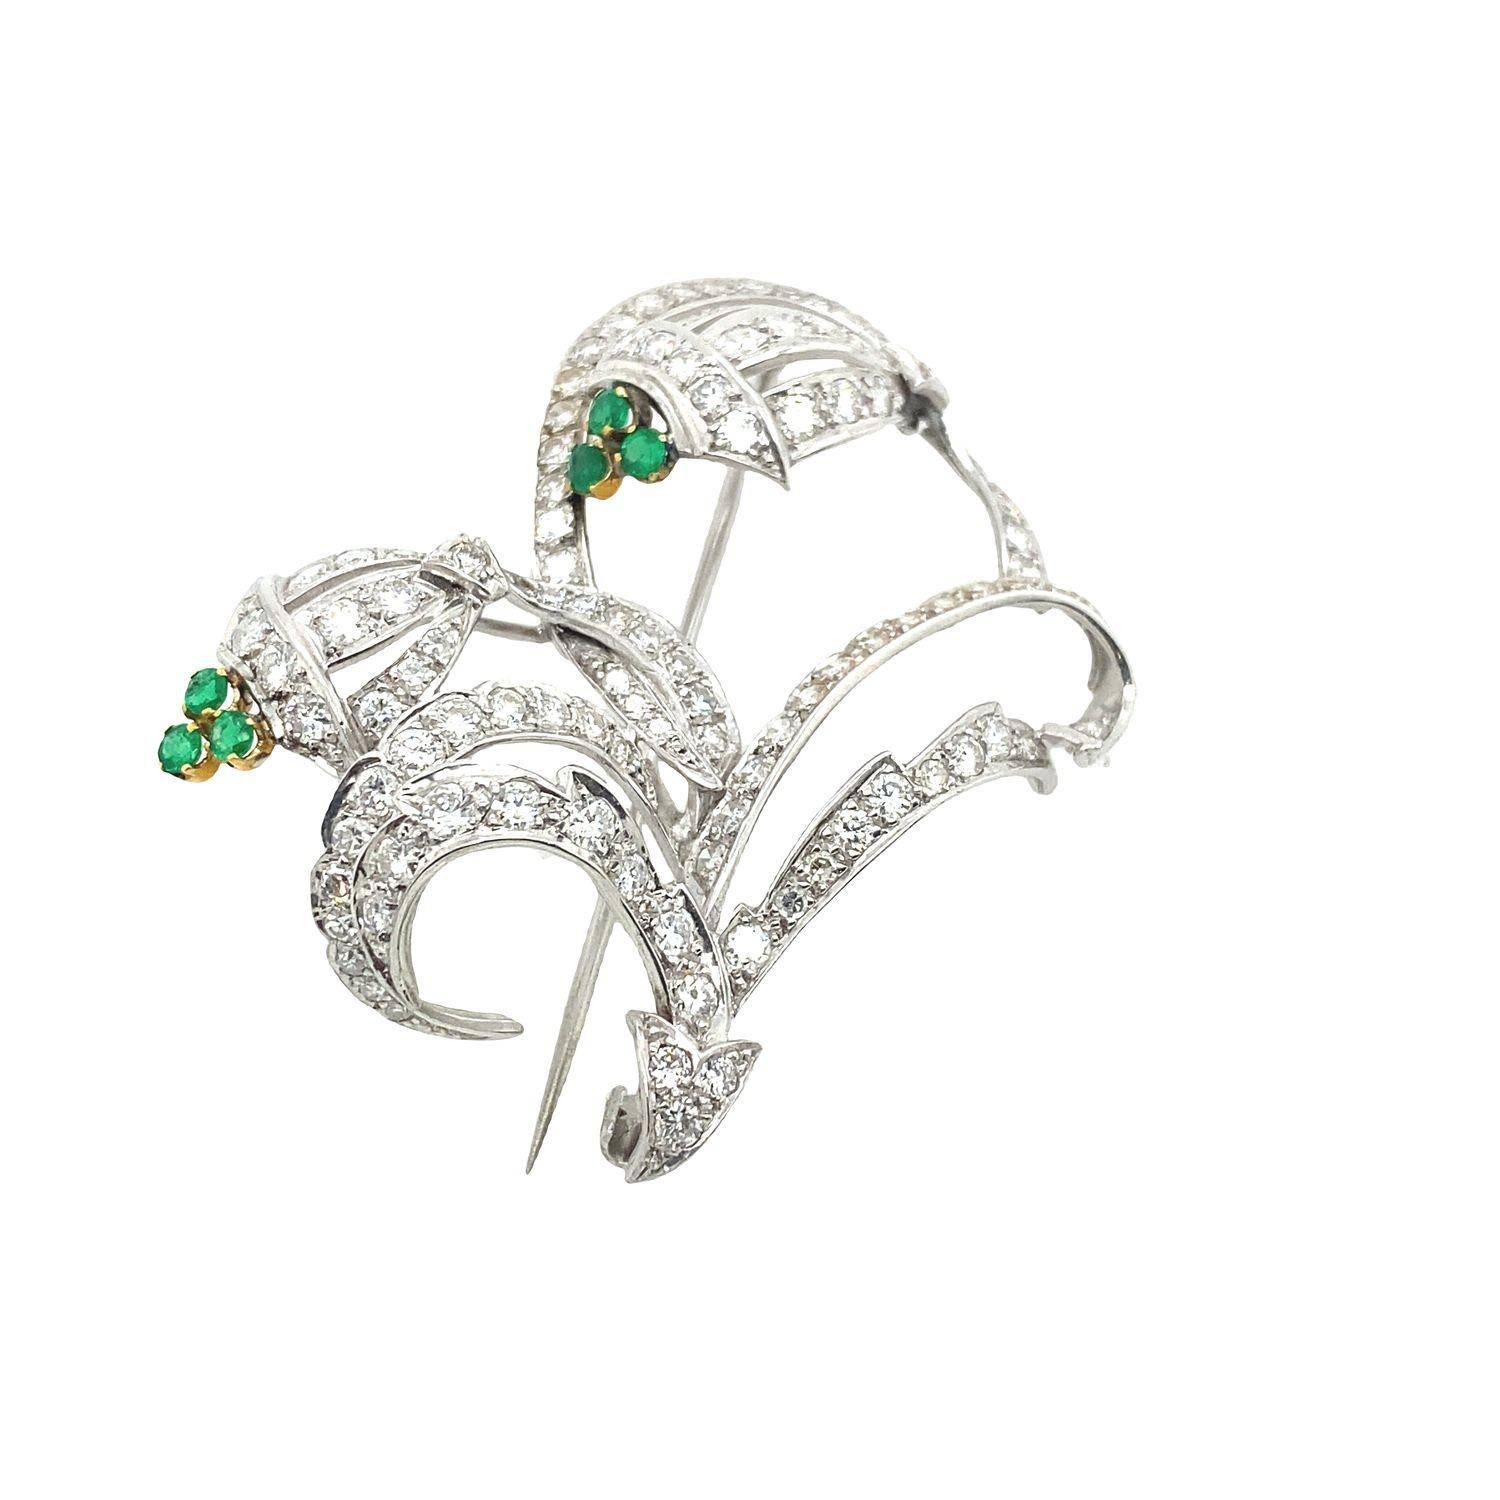 Vintage Platinum & 18ct Gold, Diamond & Emerald Brooch With 2.50ct of Diamonds

Magnificent vintage platinum &18ct Gold Diamond & Emerald set brooch with 2.50ct of Diamonds and 0.18ct of fine quality Emeralds.

Additional Information:
Total Diamond